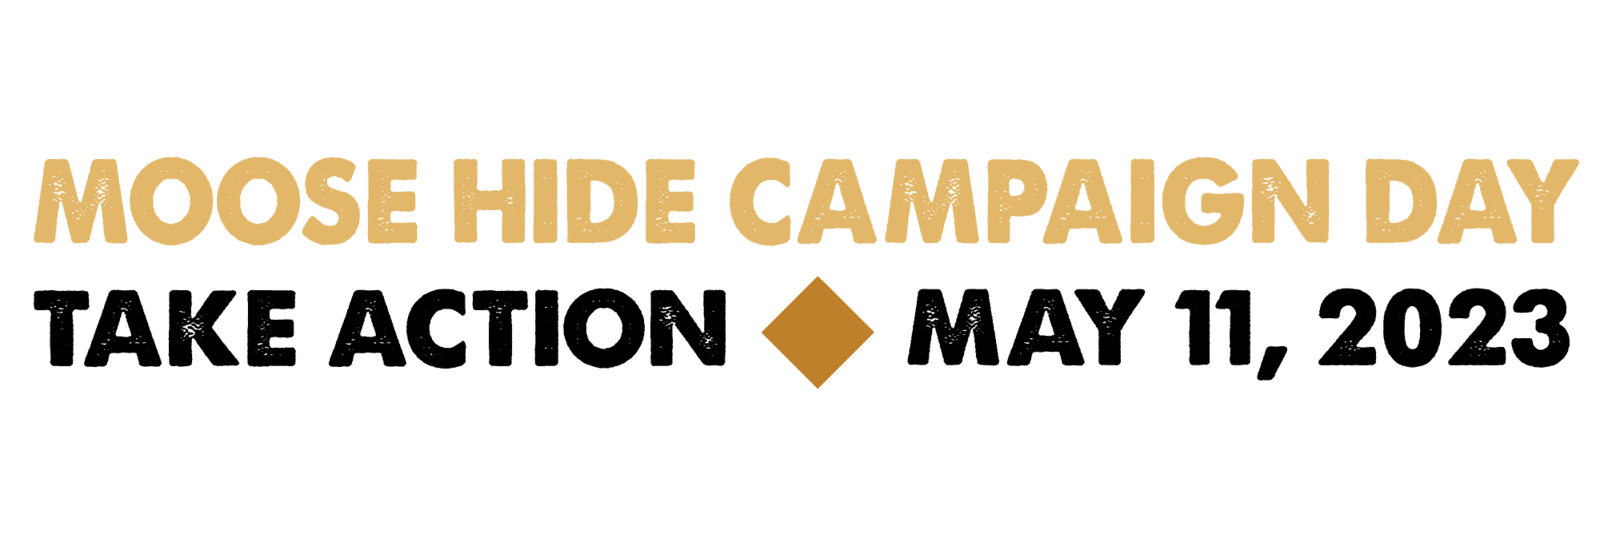 Moose Hide Campaign Day May 11, 2023